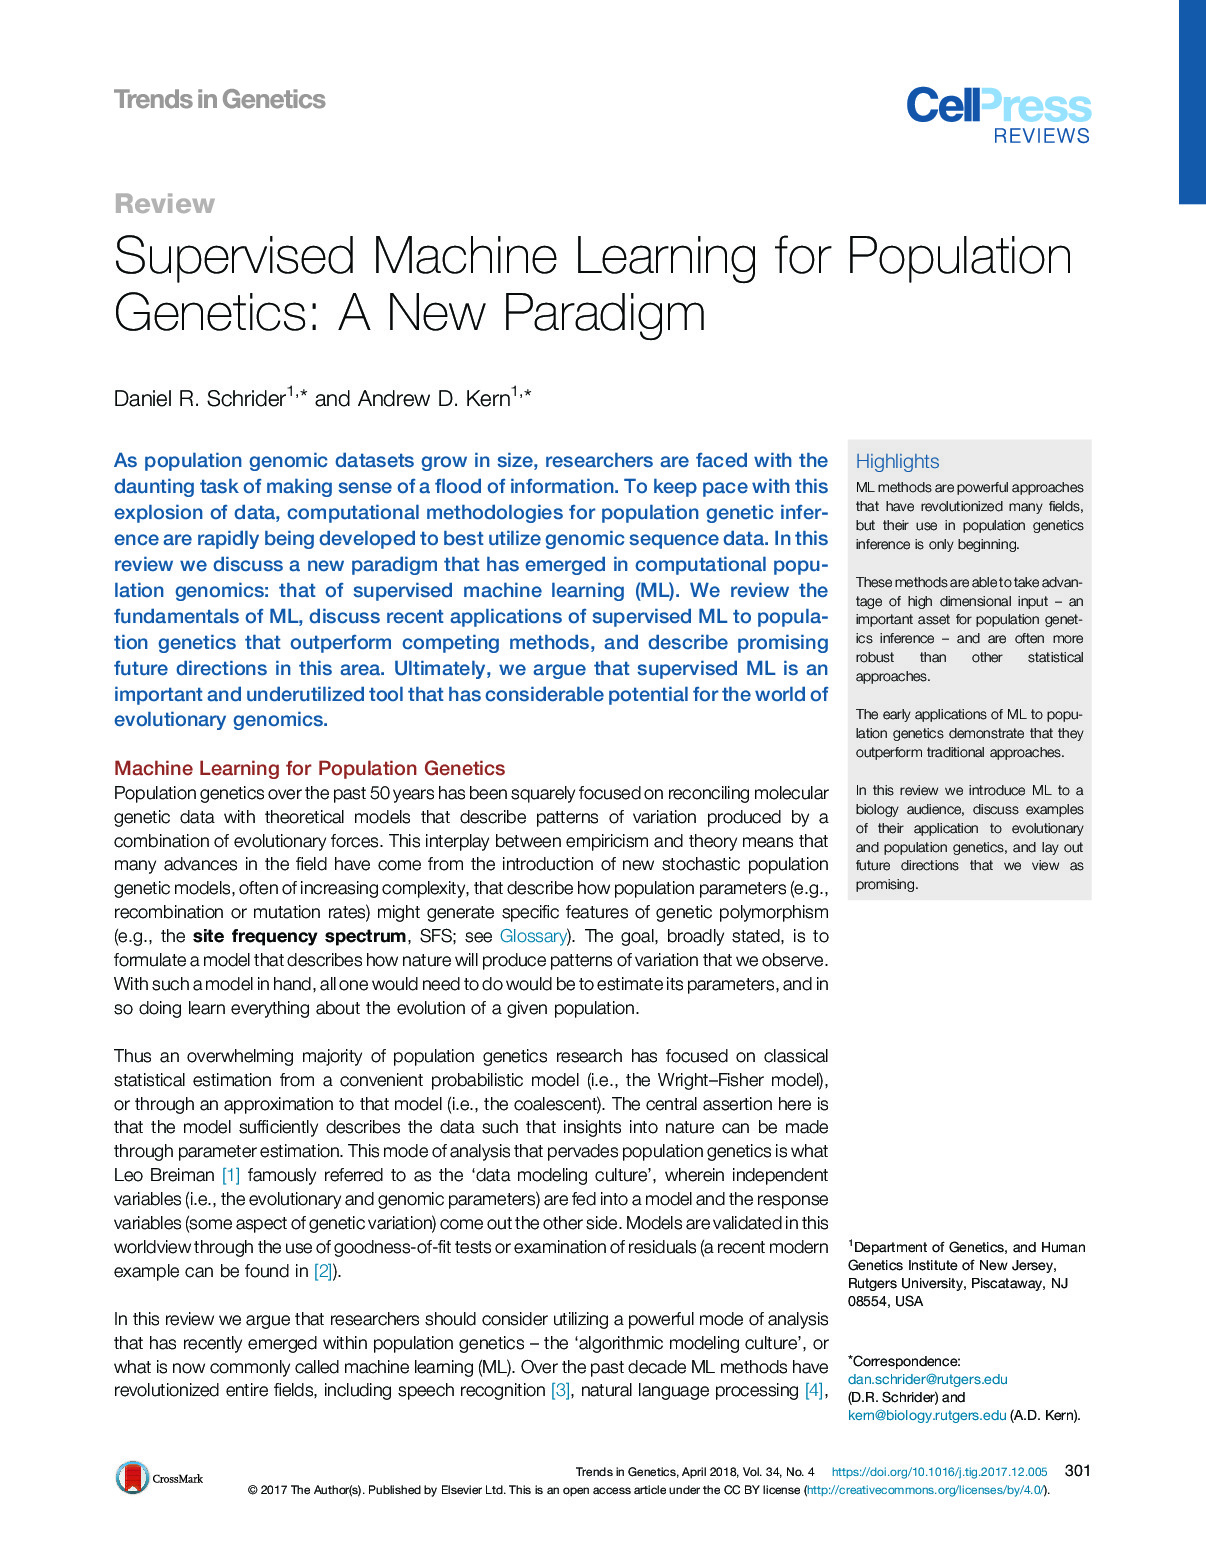 Supervised Machine Learning for Population Genetics – A New Paradigm